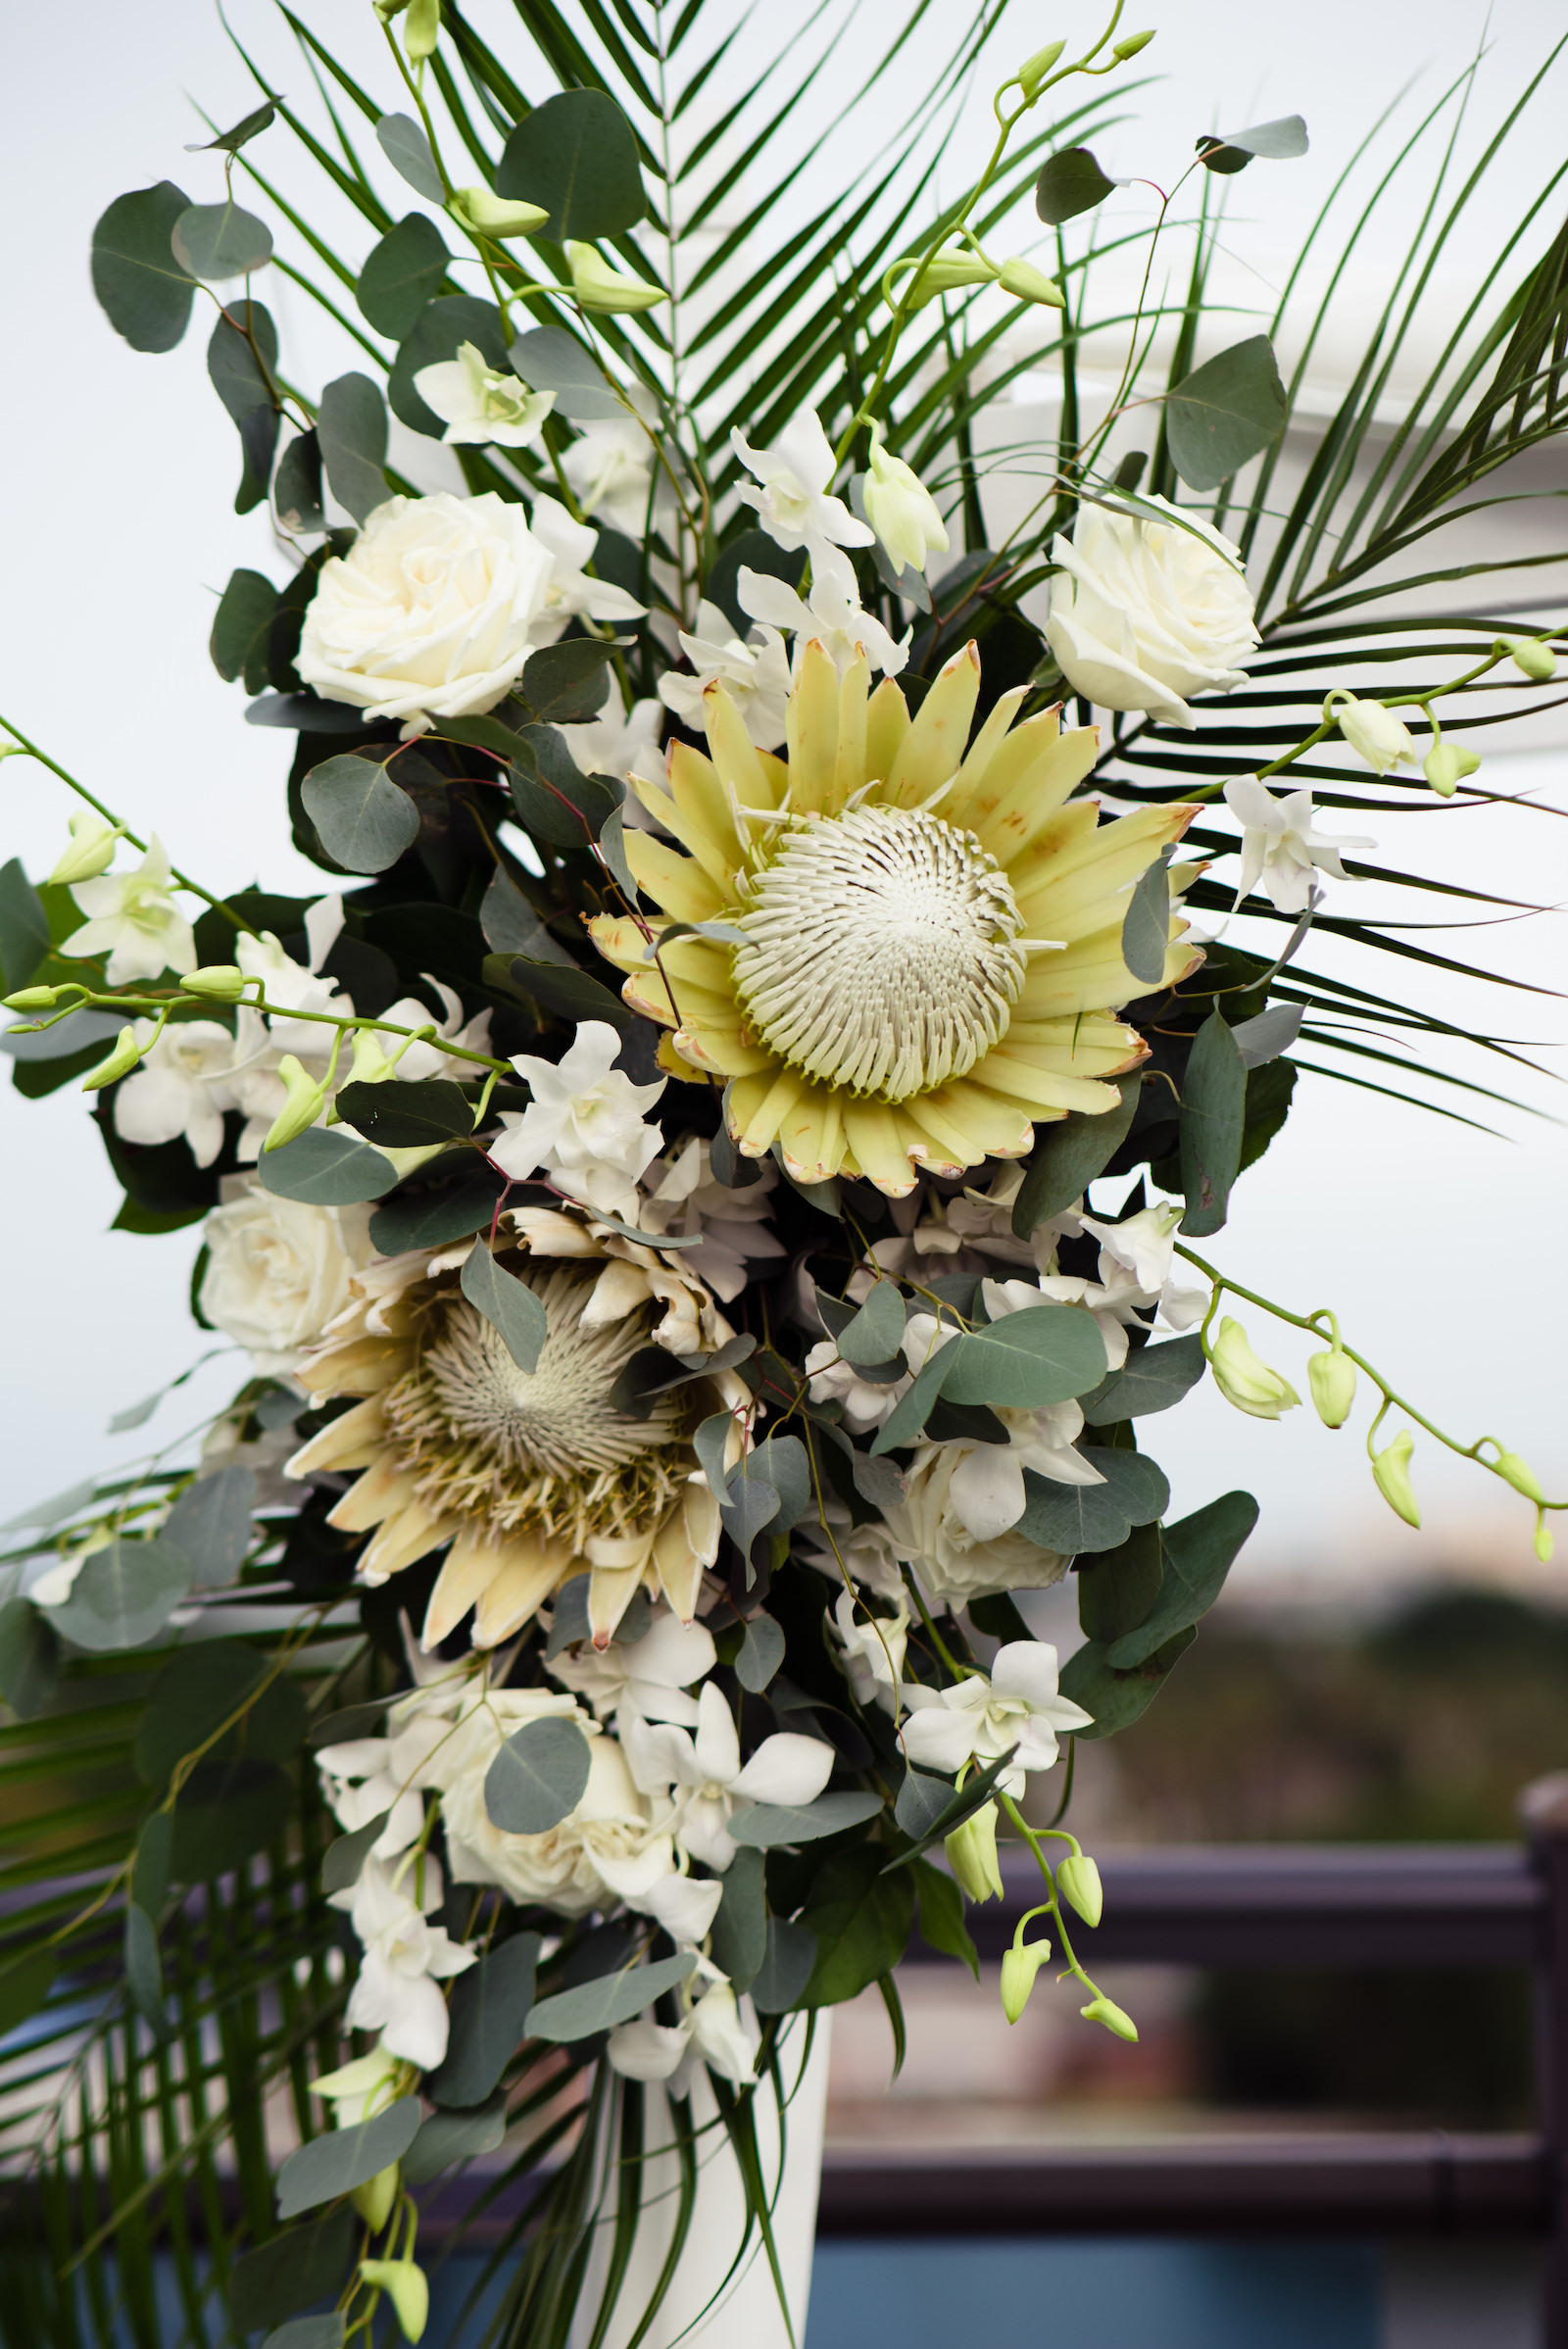 Neutral Boho Wedding Ceremony Decor, White and Yellow King Proteas, White Roses, Eucalyptus, Palm Fronds, White Orchids Wedding Floral Arrangement | Tampa Bay Wedding Planner Perfecting the Plan | Wedding Florist Iza's Flowers